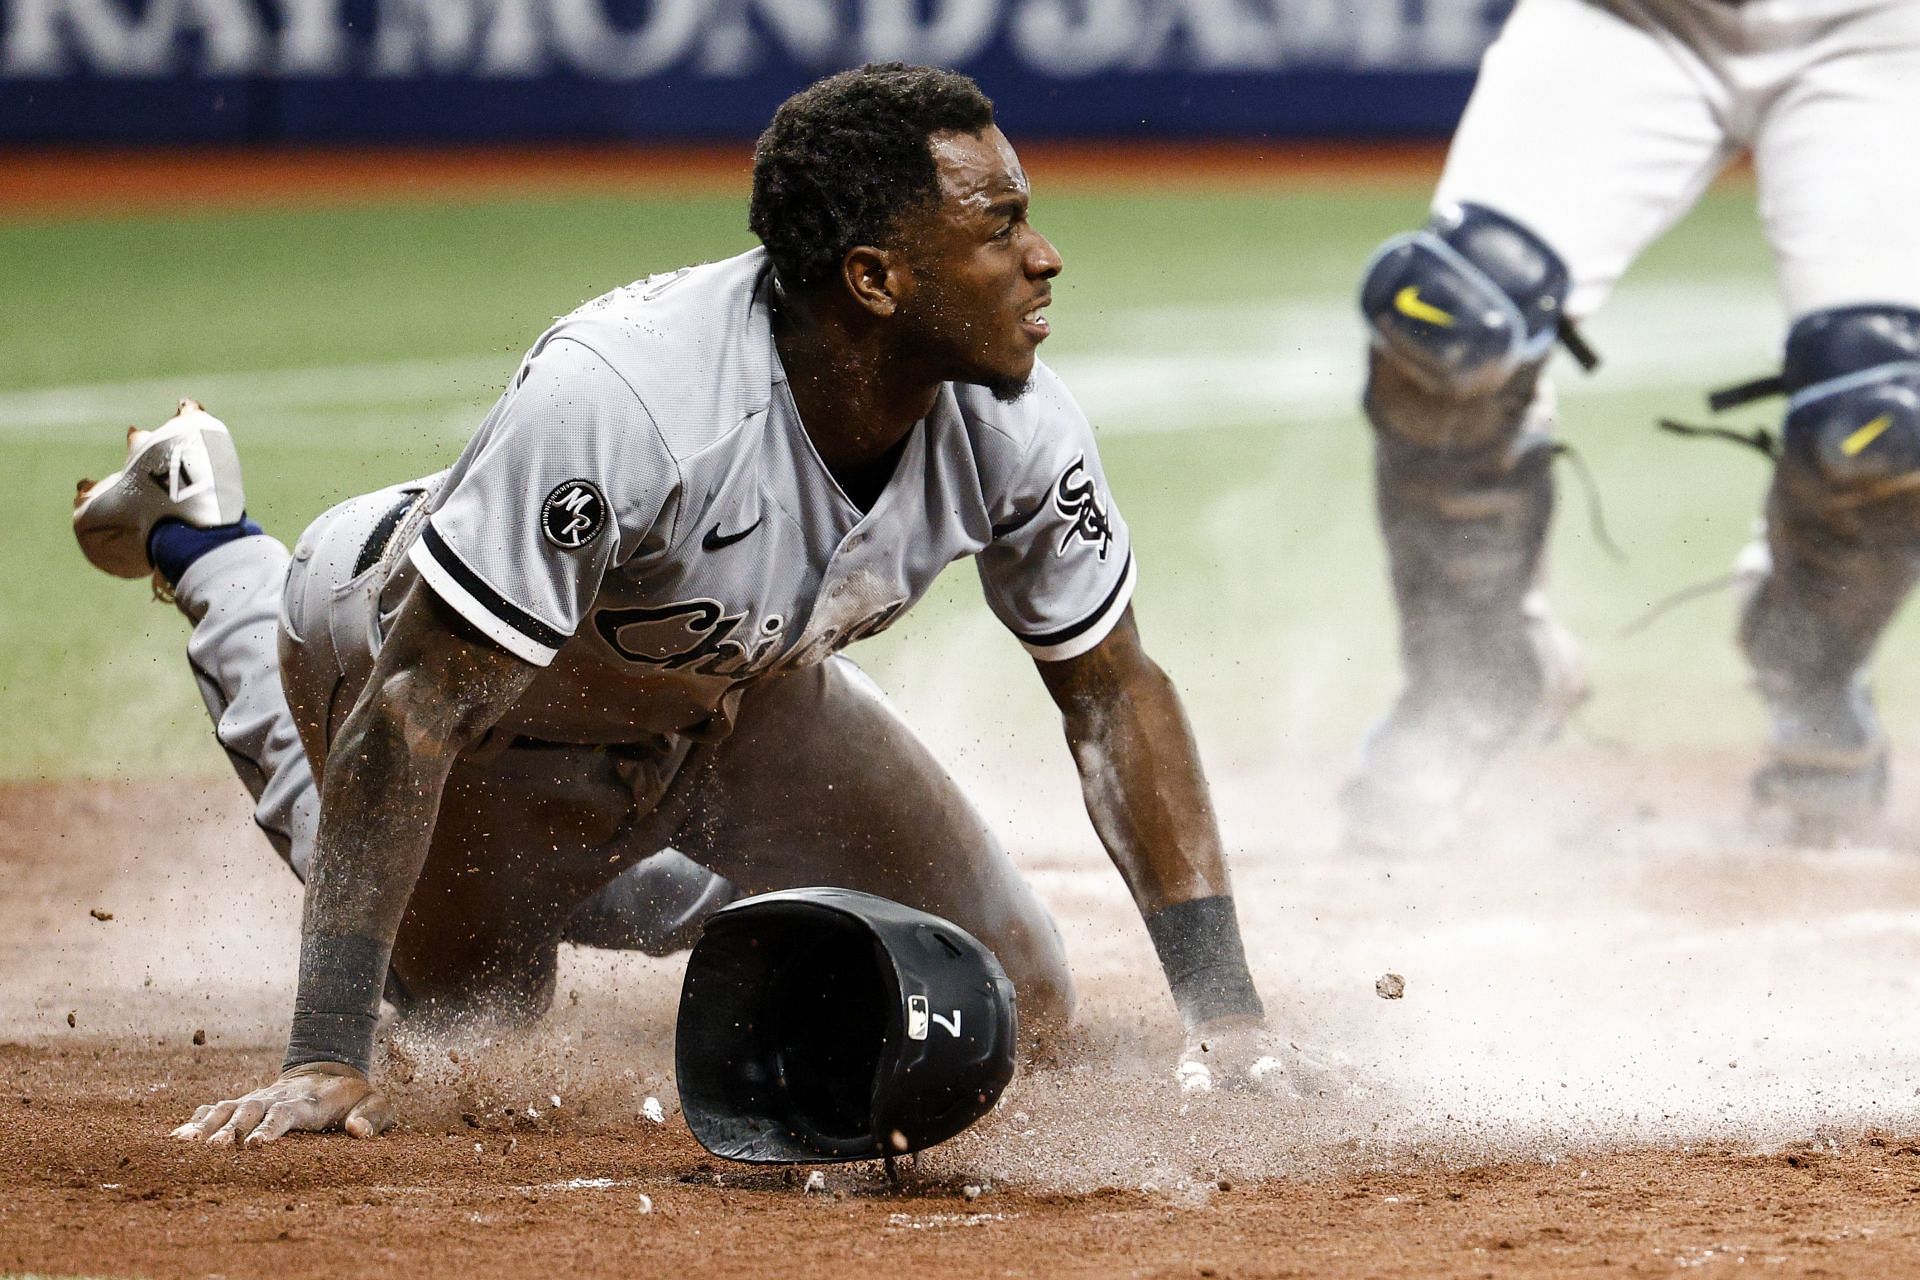 Chicago White Sox v Tampa Bay Rays: ST PETERSBURG, FLORIDA - AUGUST 20: Tim Anderson #7 of the Chicago White Sox slides safely into home plate on a fielders choice from the bat of Jose Abreu #79 during the fifth inning against the Tampa Bay Rays at Tropicana Field on August 20, 2021 in St Petersburg, Florida. (Photo by Douglas P. DeFelice/Getty Images)